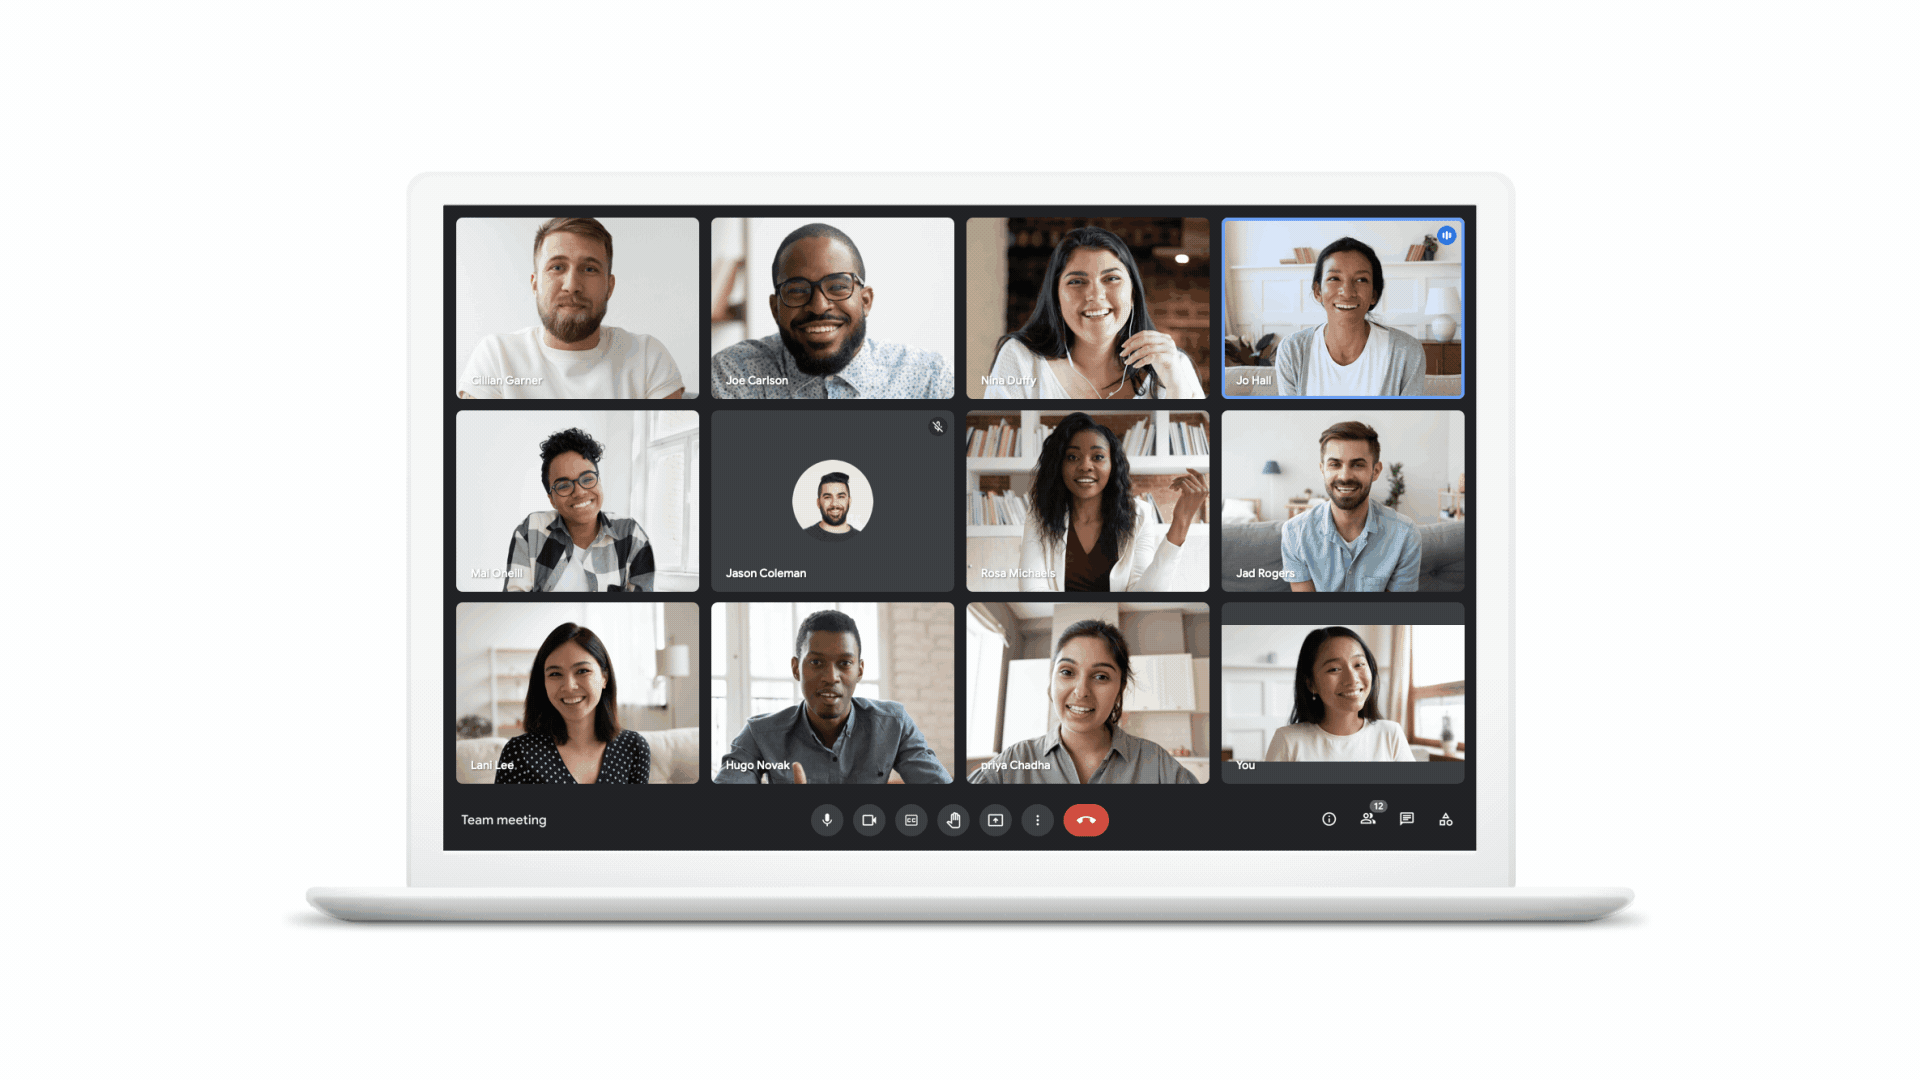 A presentation being unpinned to view all participants in a 12-person video meeting.